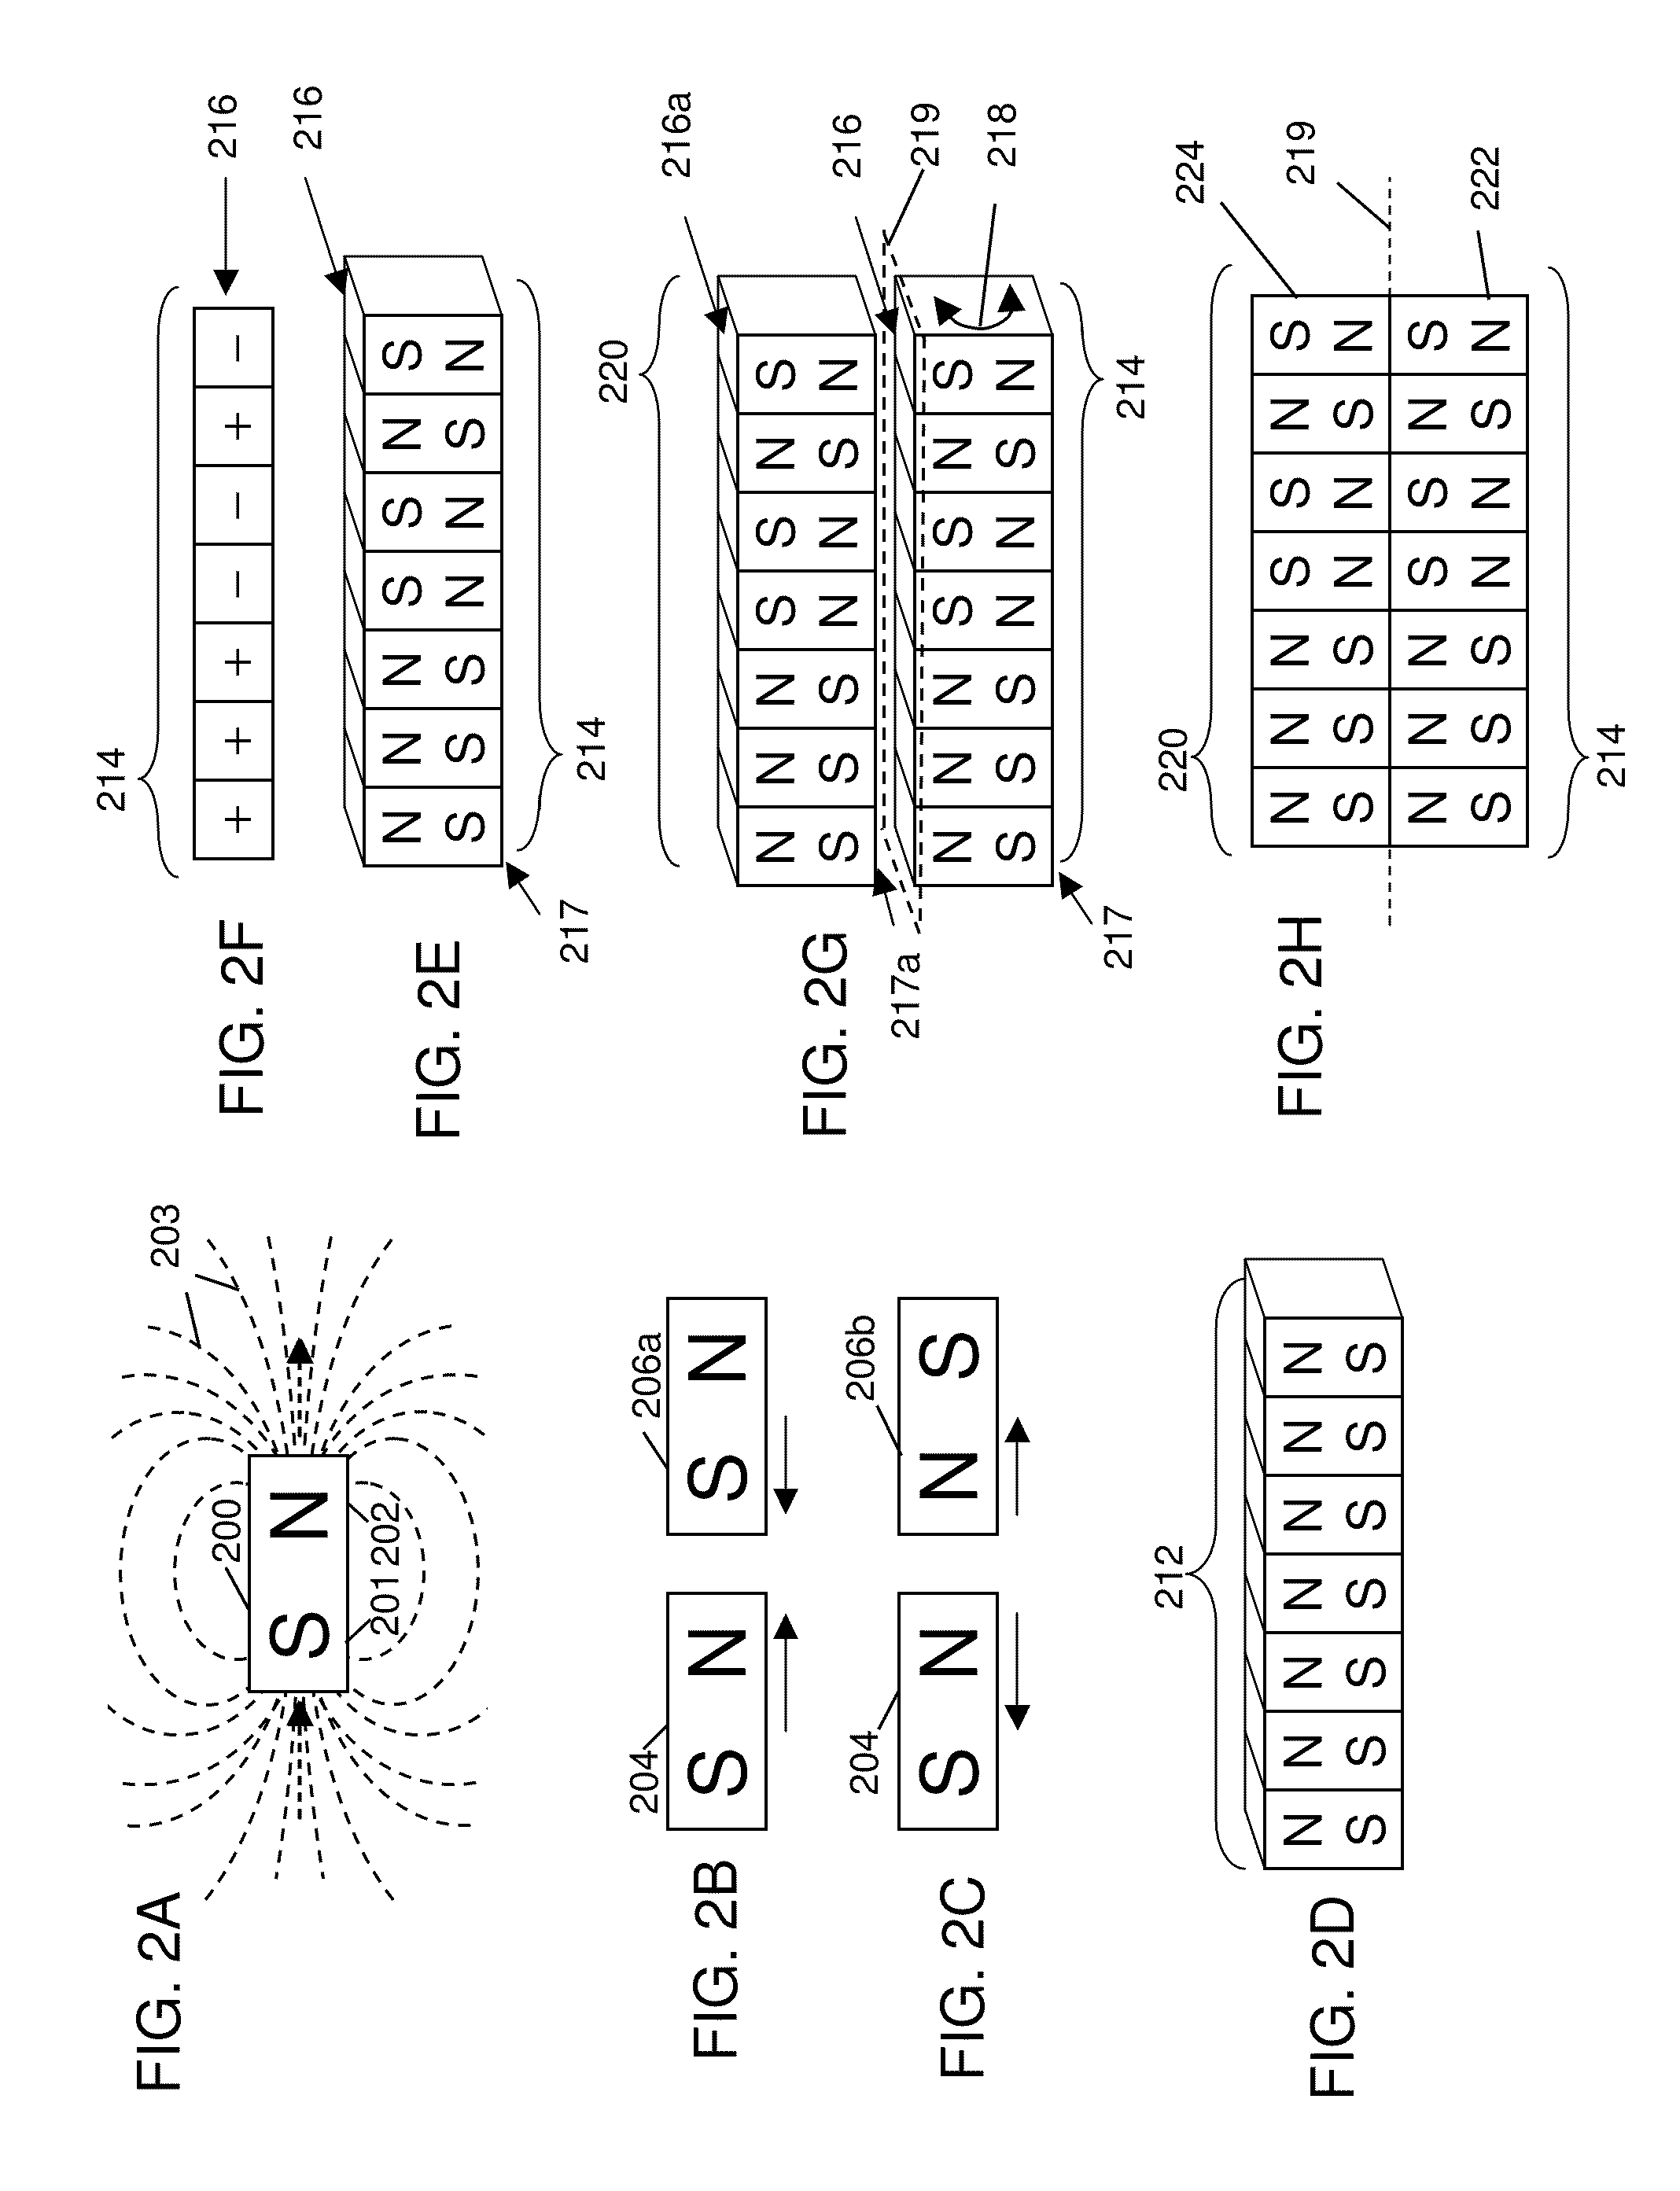 Coded linear magnet arrays in two dimensions